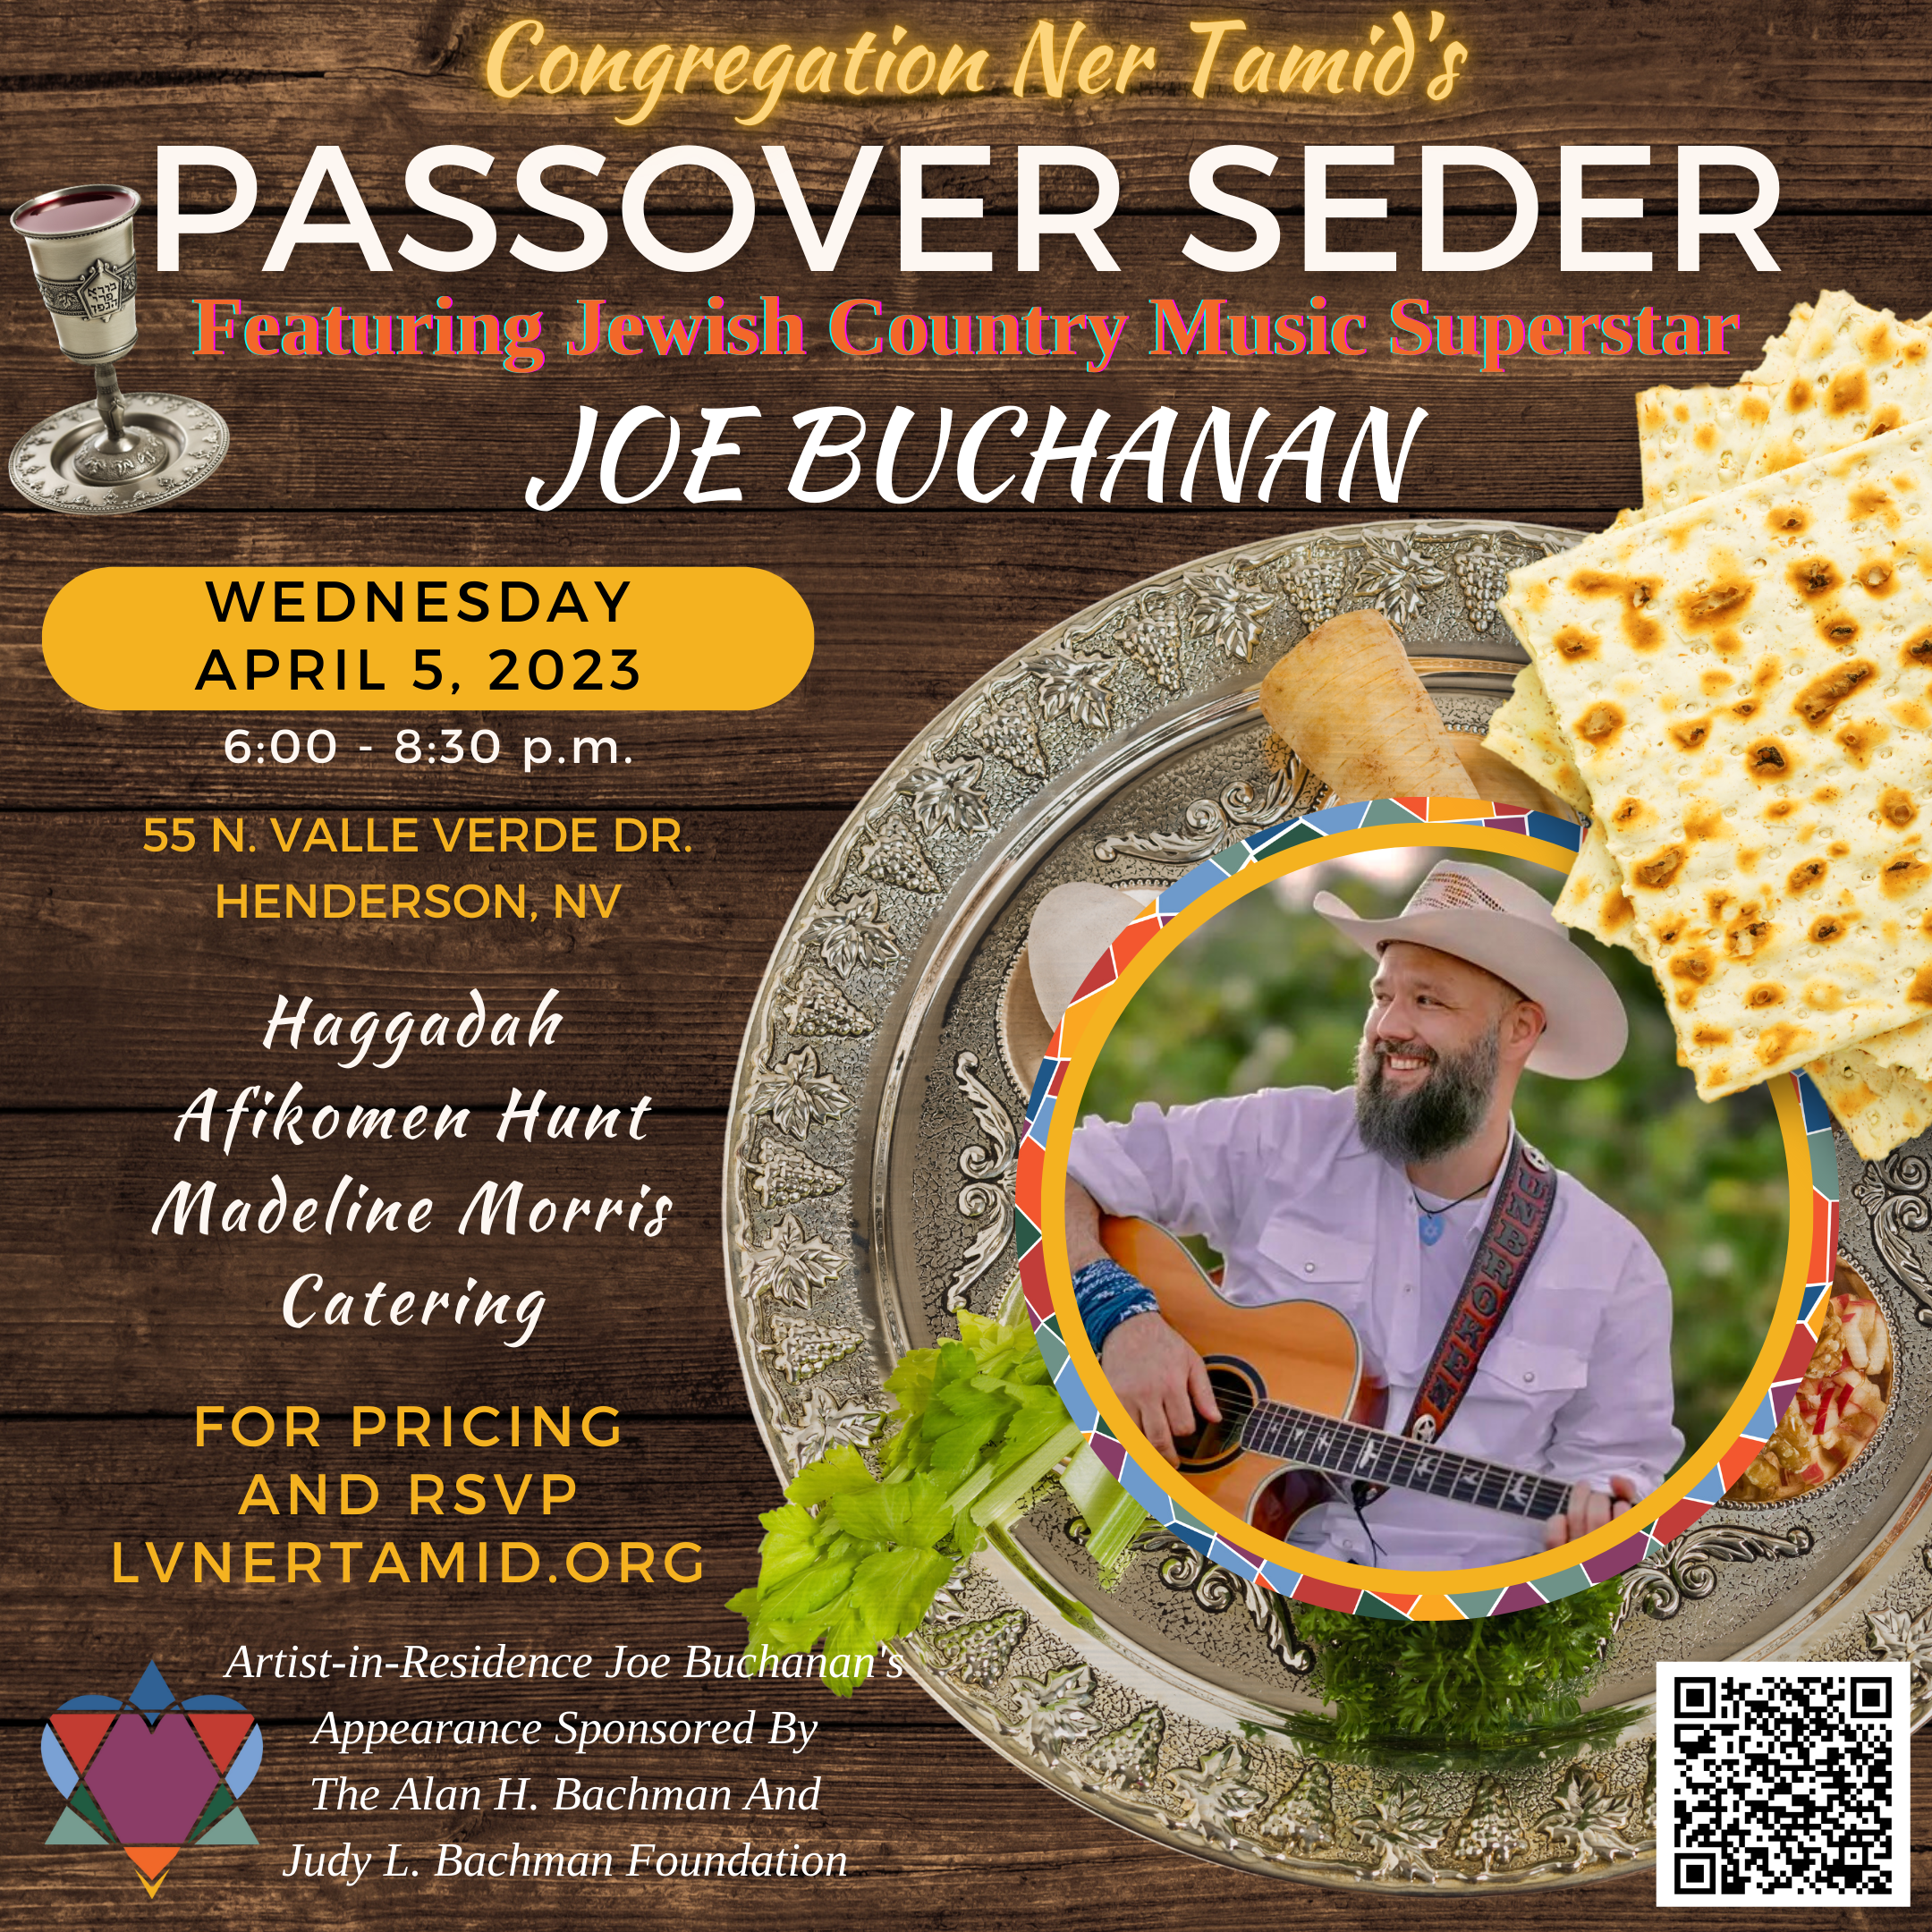 TRADITIONAL PASSOVER SEDER